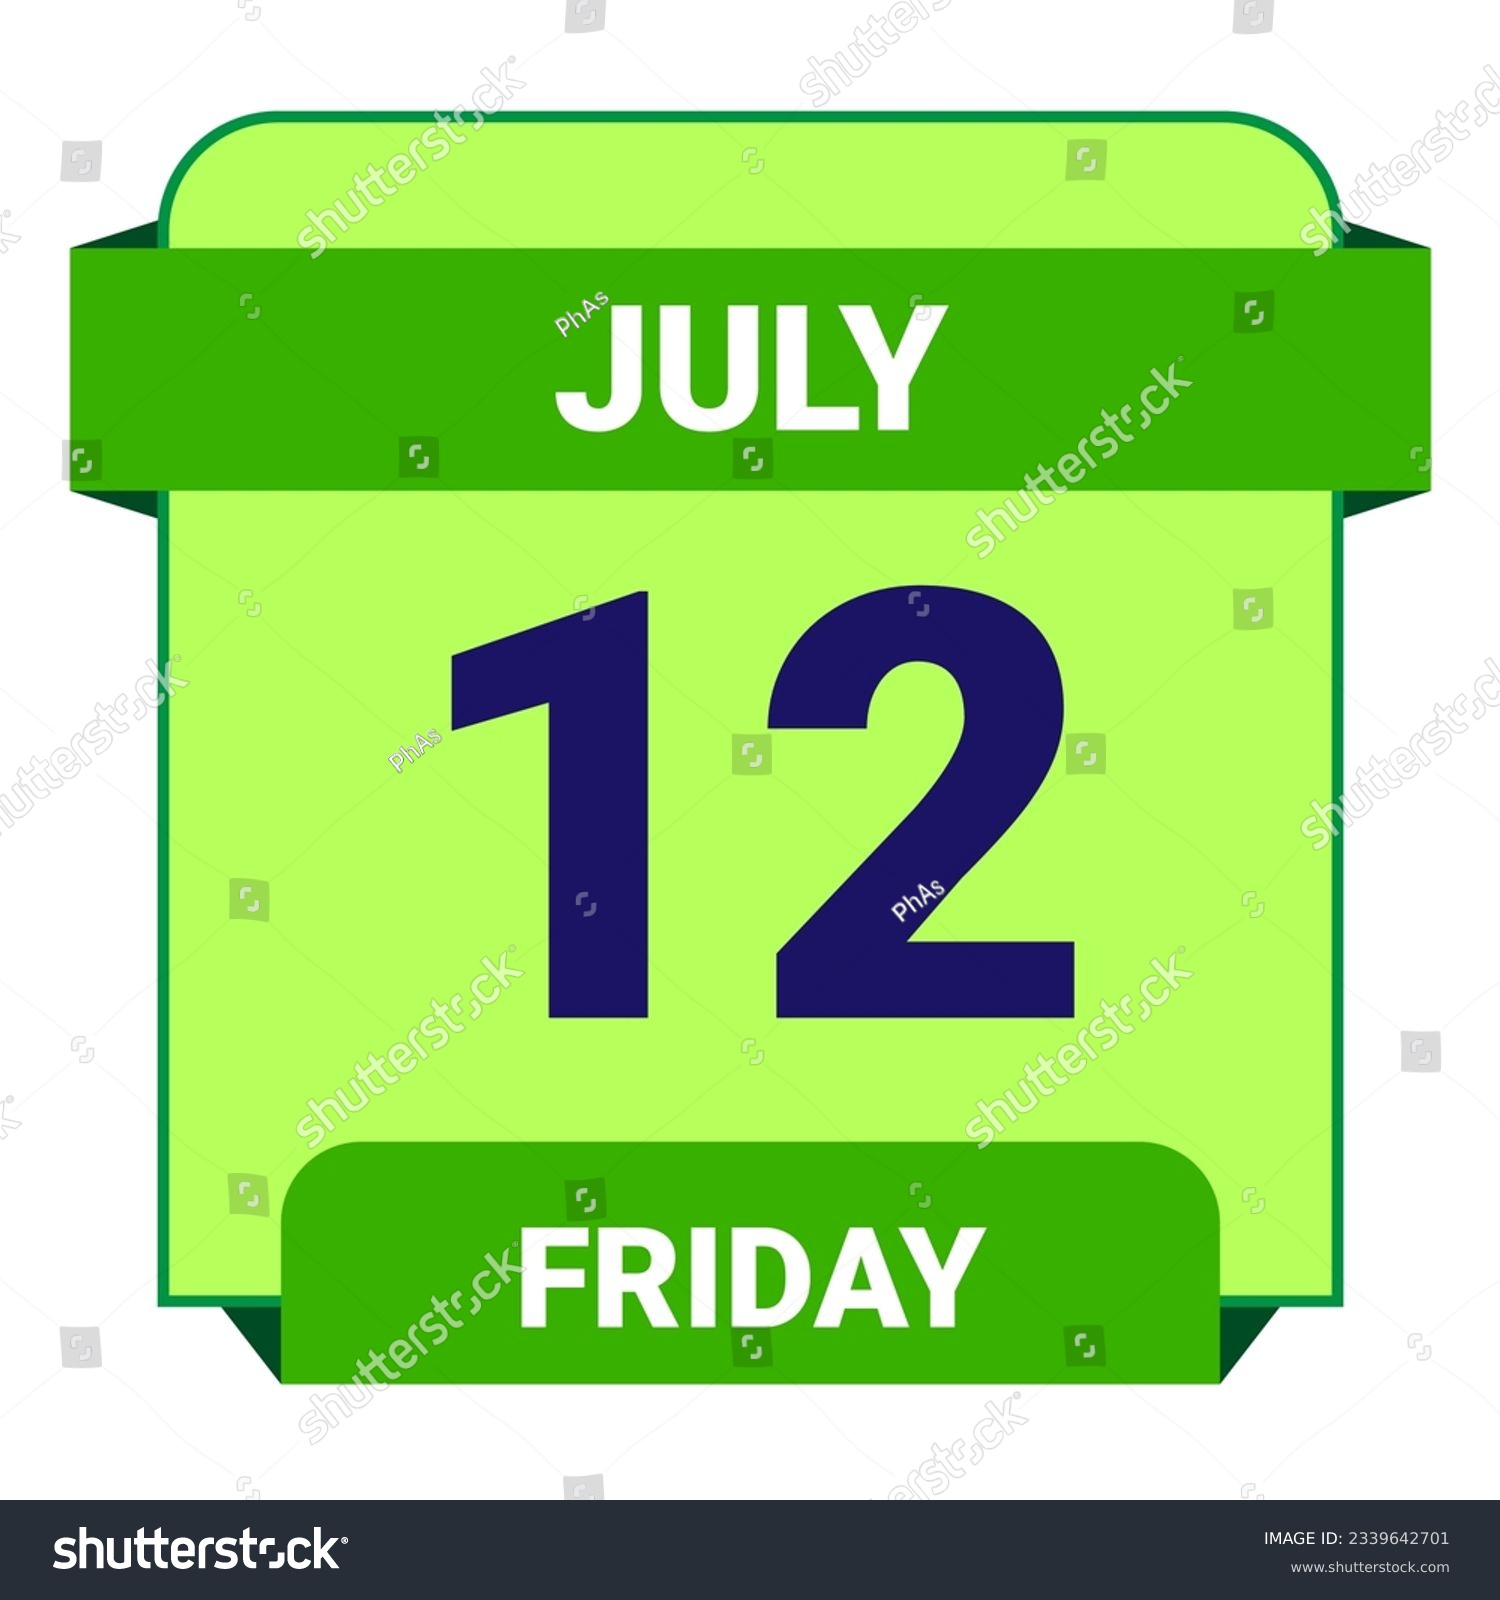 SVG of 12 July, Friday. Date template. Useful design for calendar or event promotion. Vector illustration EPS 10 File. Isolated on white background.  svg